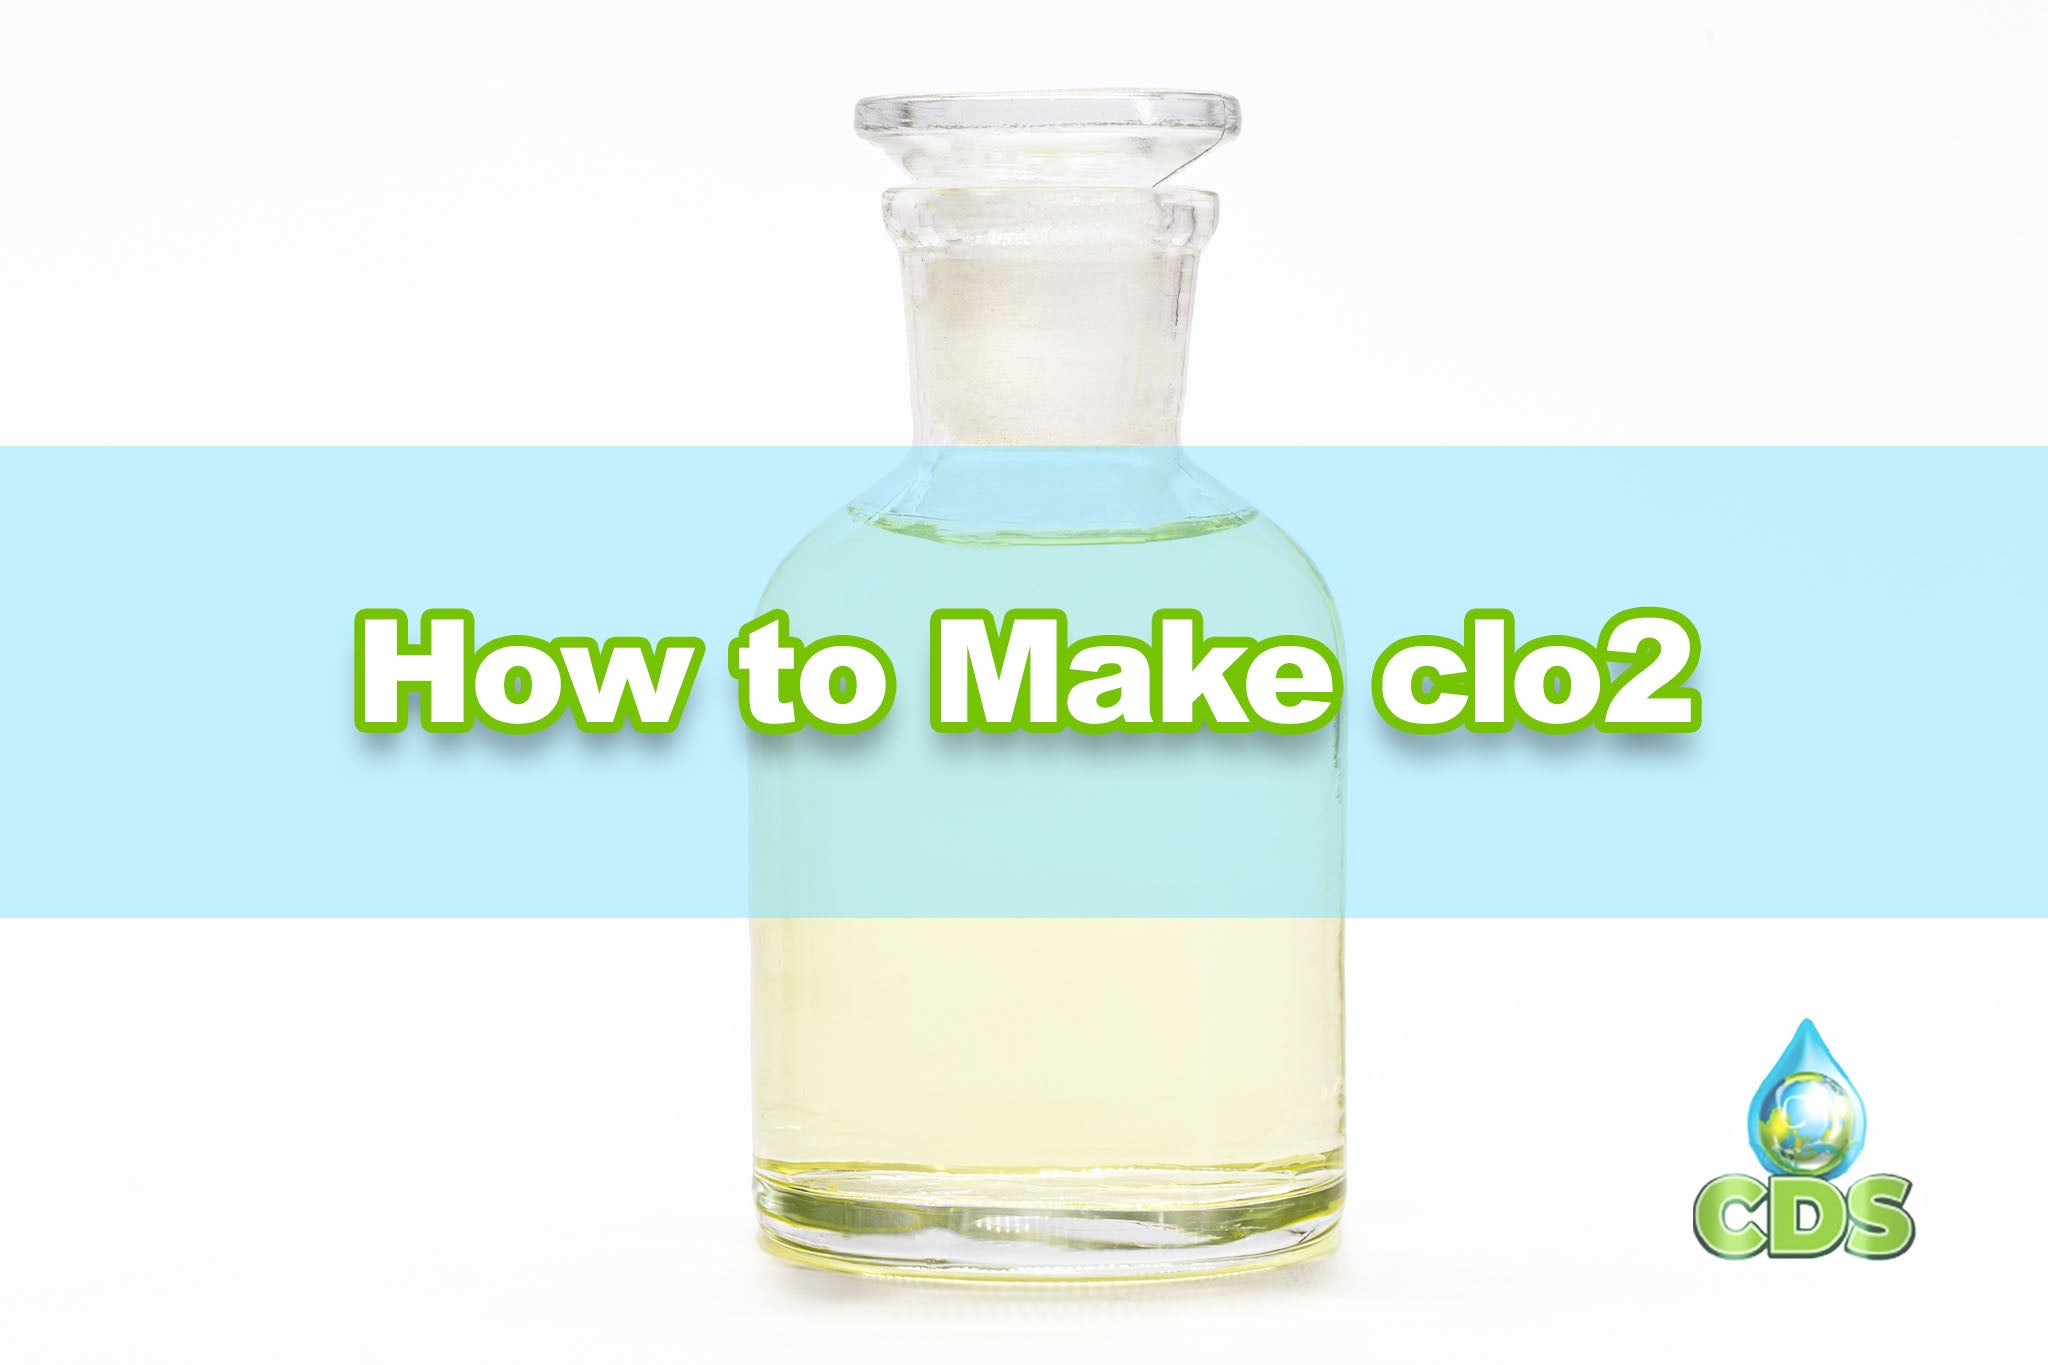 How to Make Clo2 at home